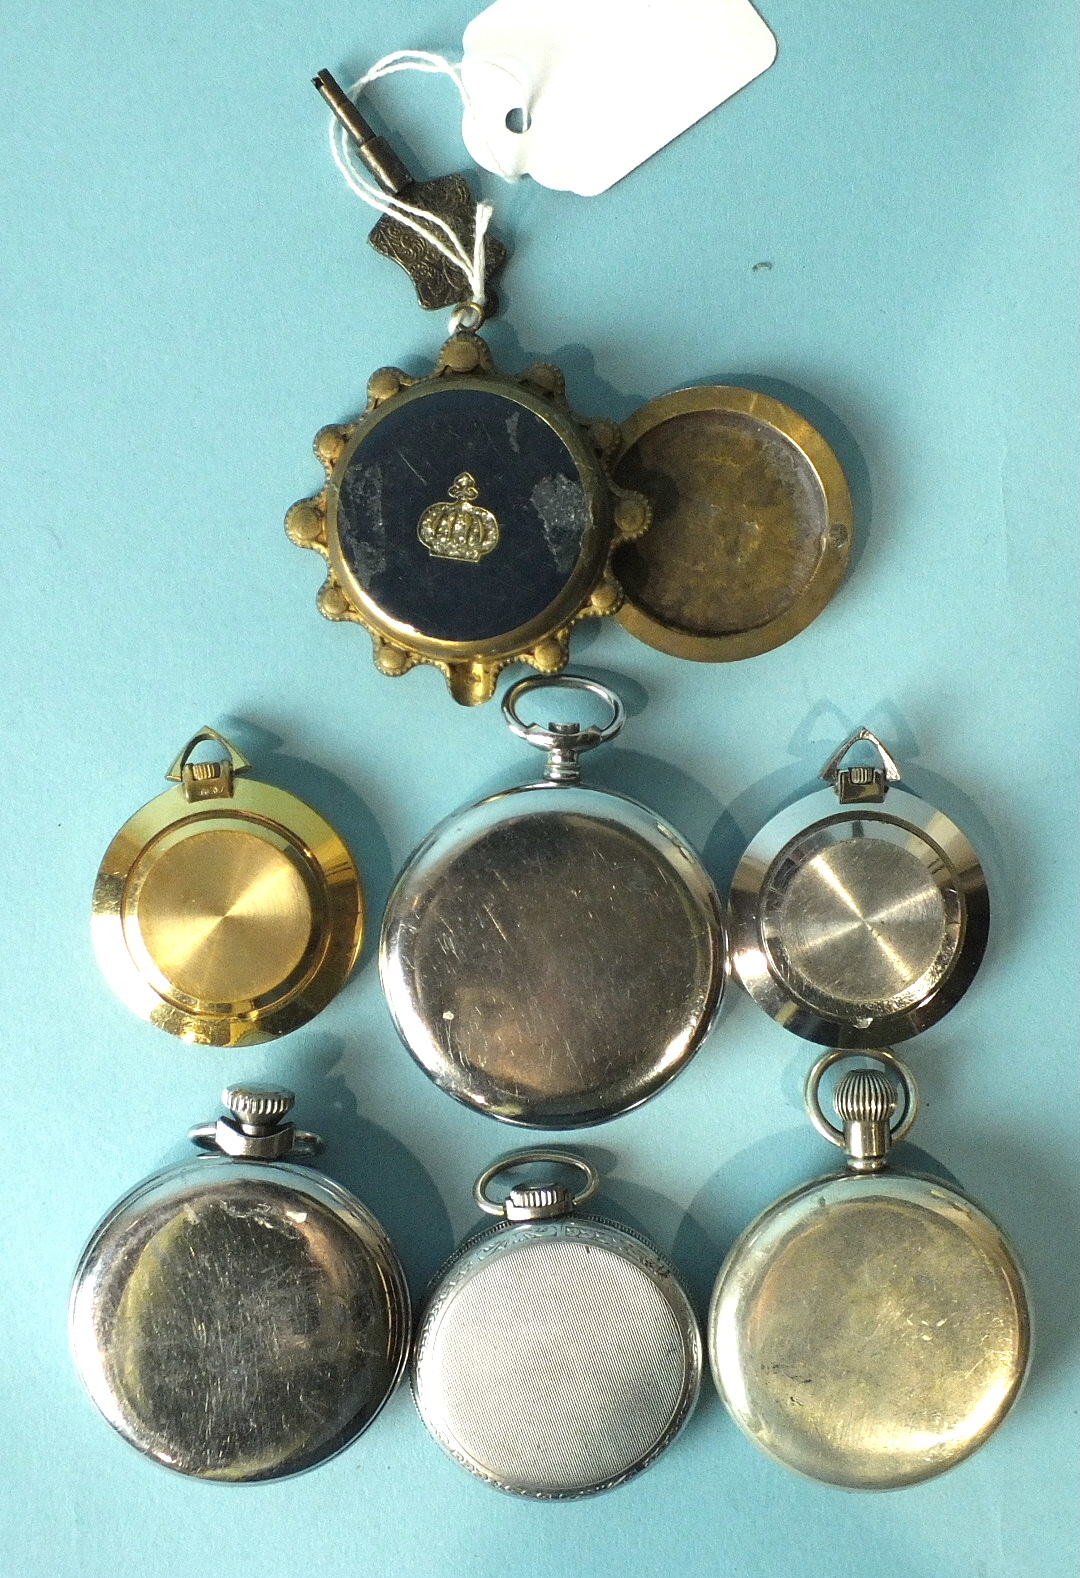 Seven various open-face pocket watches by Ingersol, Sekonda, Derrick and Shu Hang. - Image 2 of 2